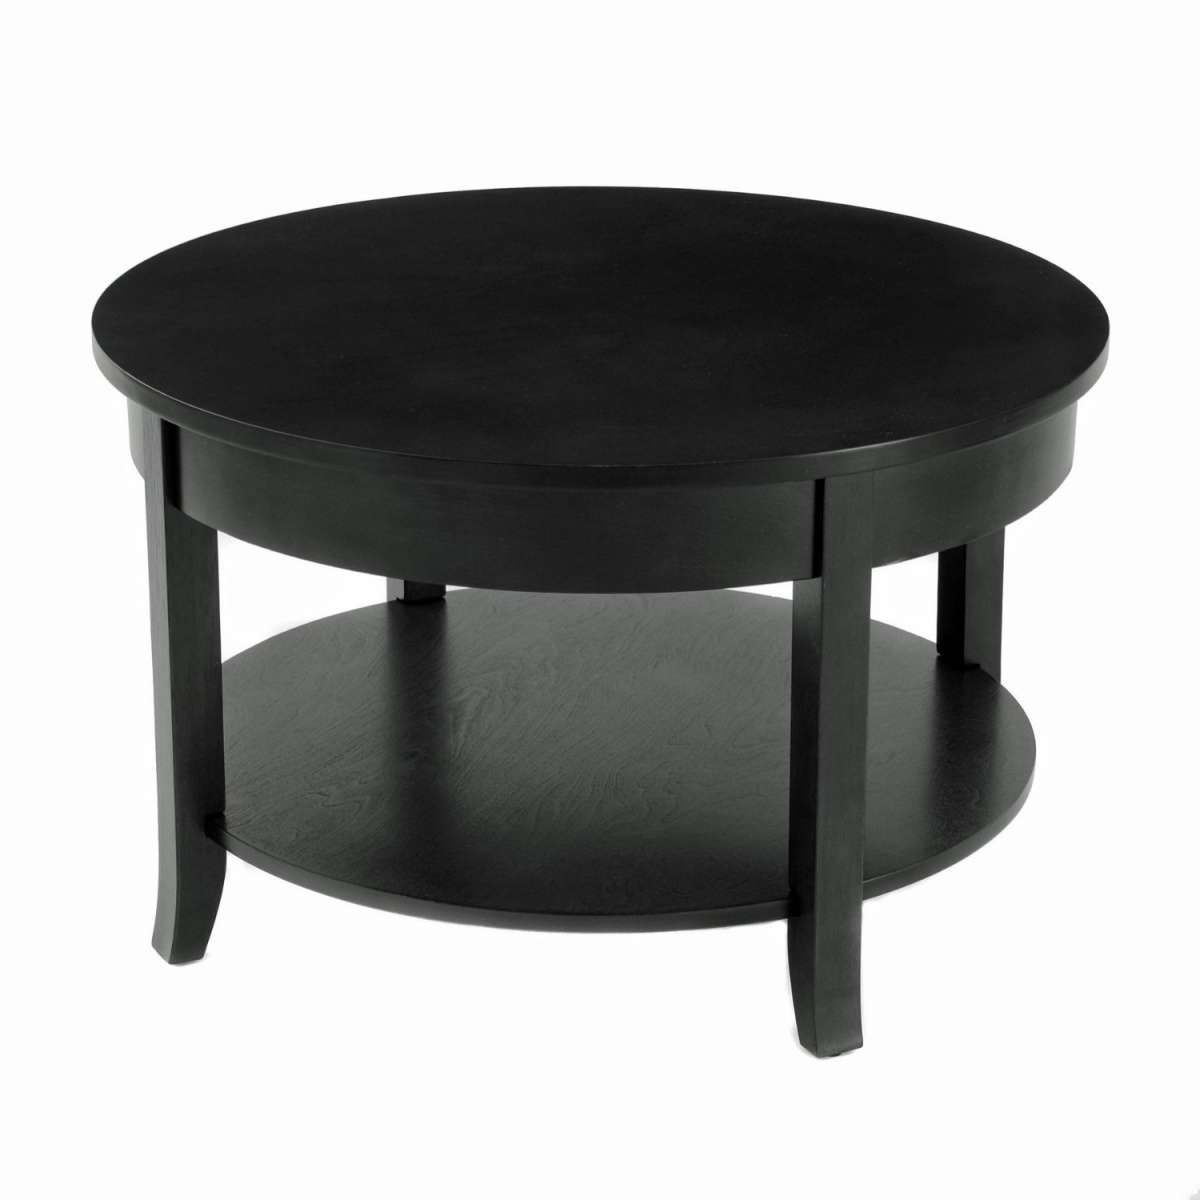 3 Ideas For Decorating Black Coffee Table (View 18 of 20)